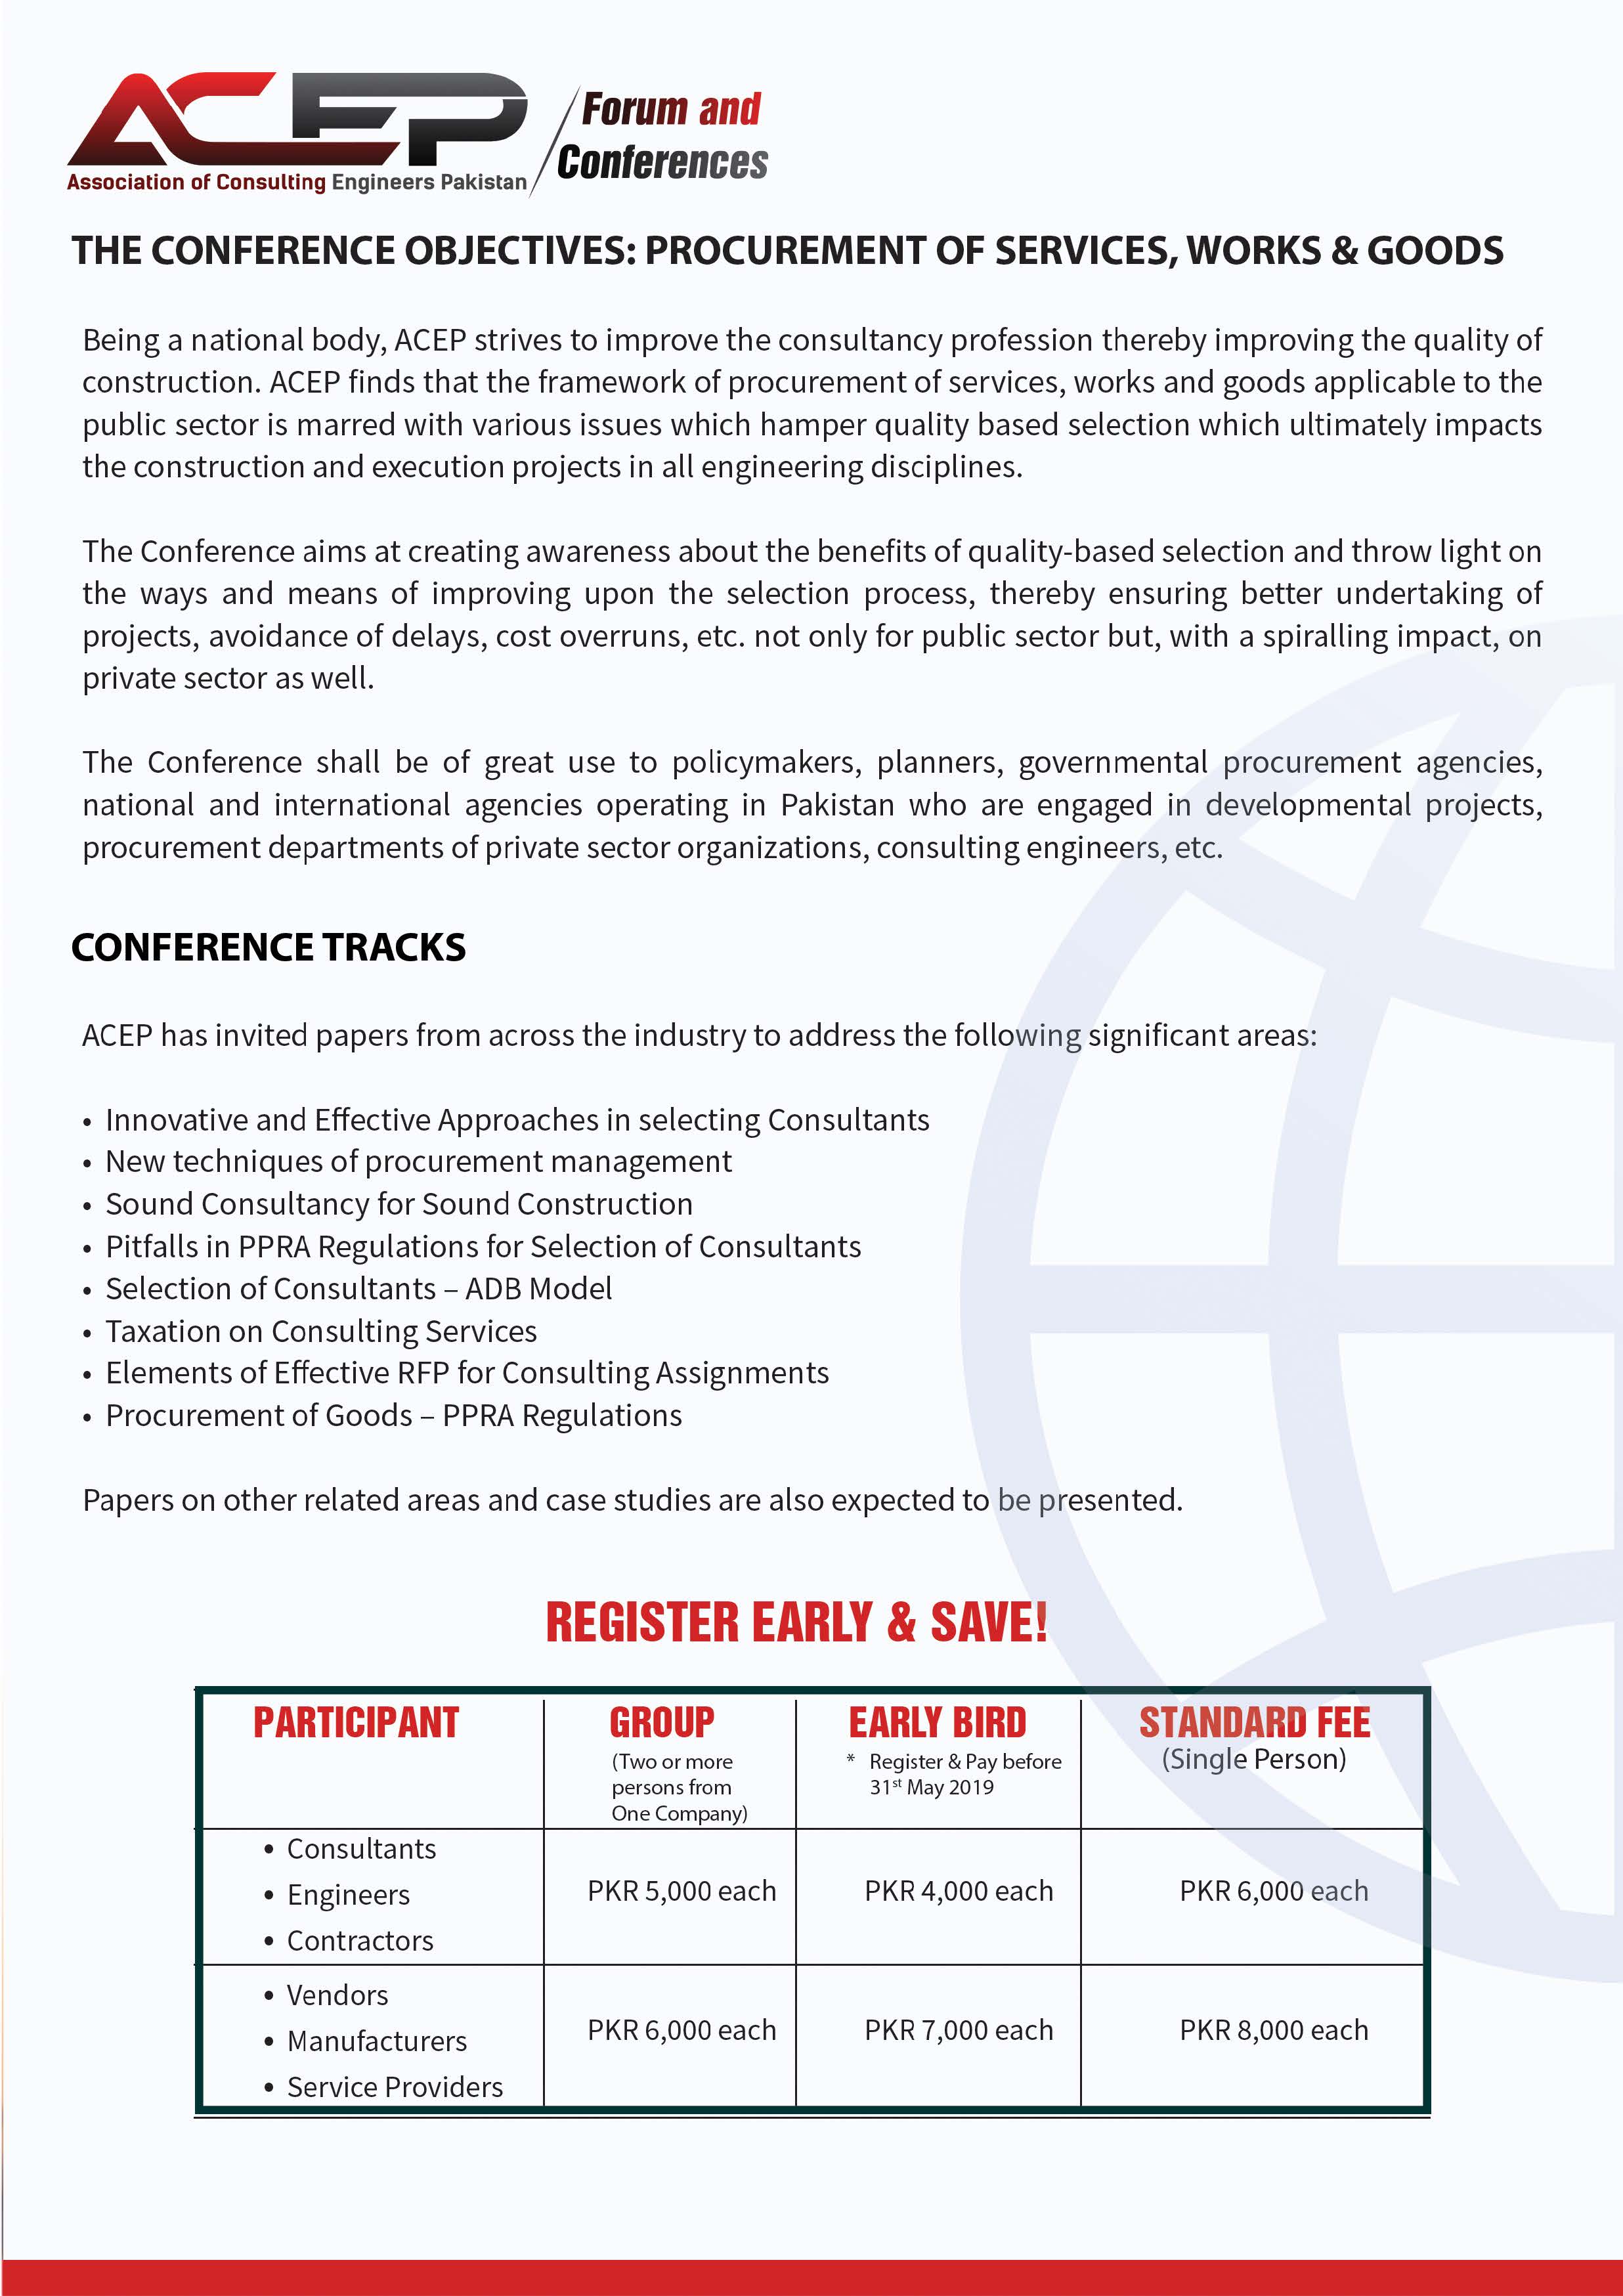 ACEP Conference-2019 brochure_Page_3_Image_0001.jpg